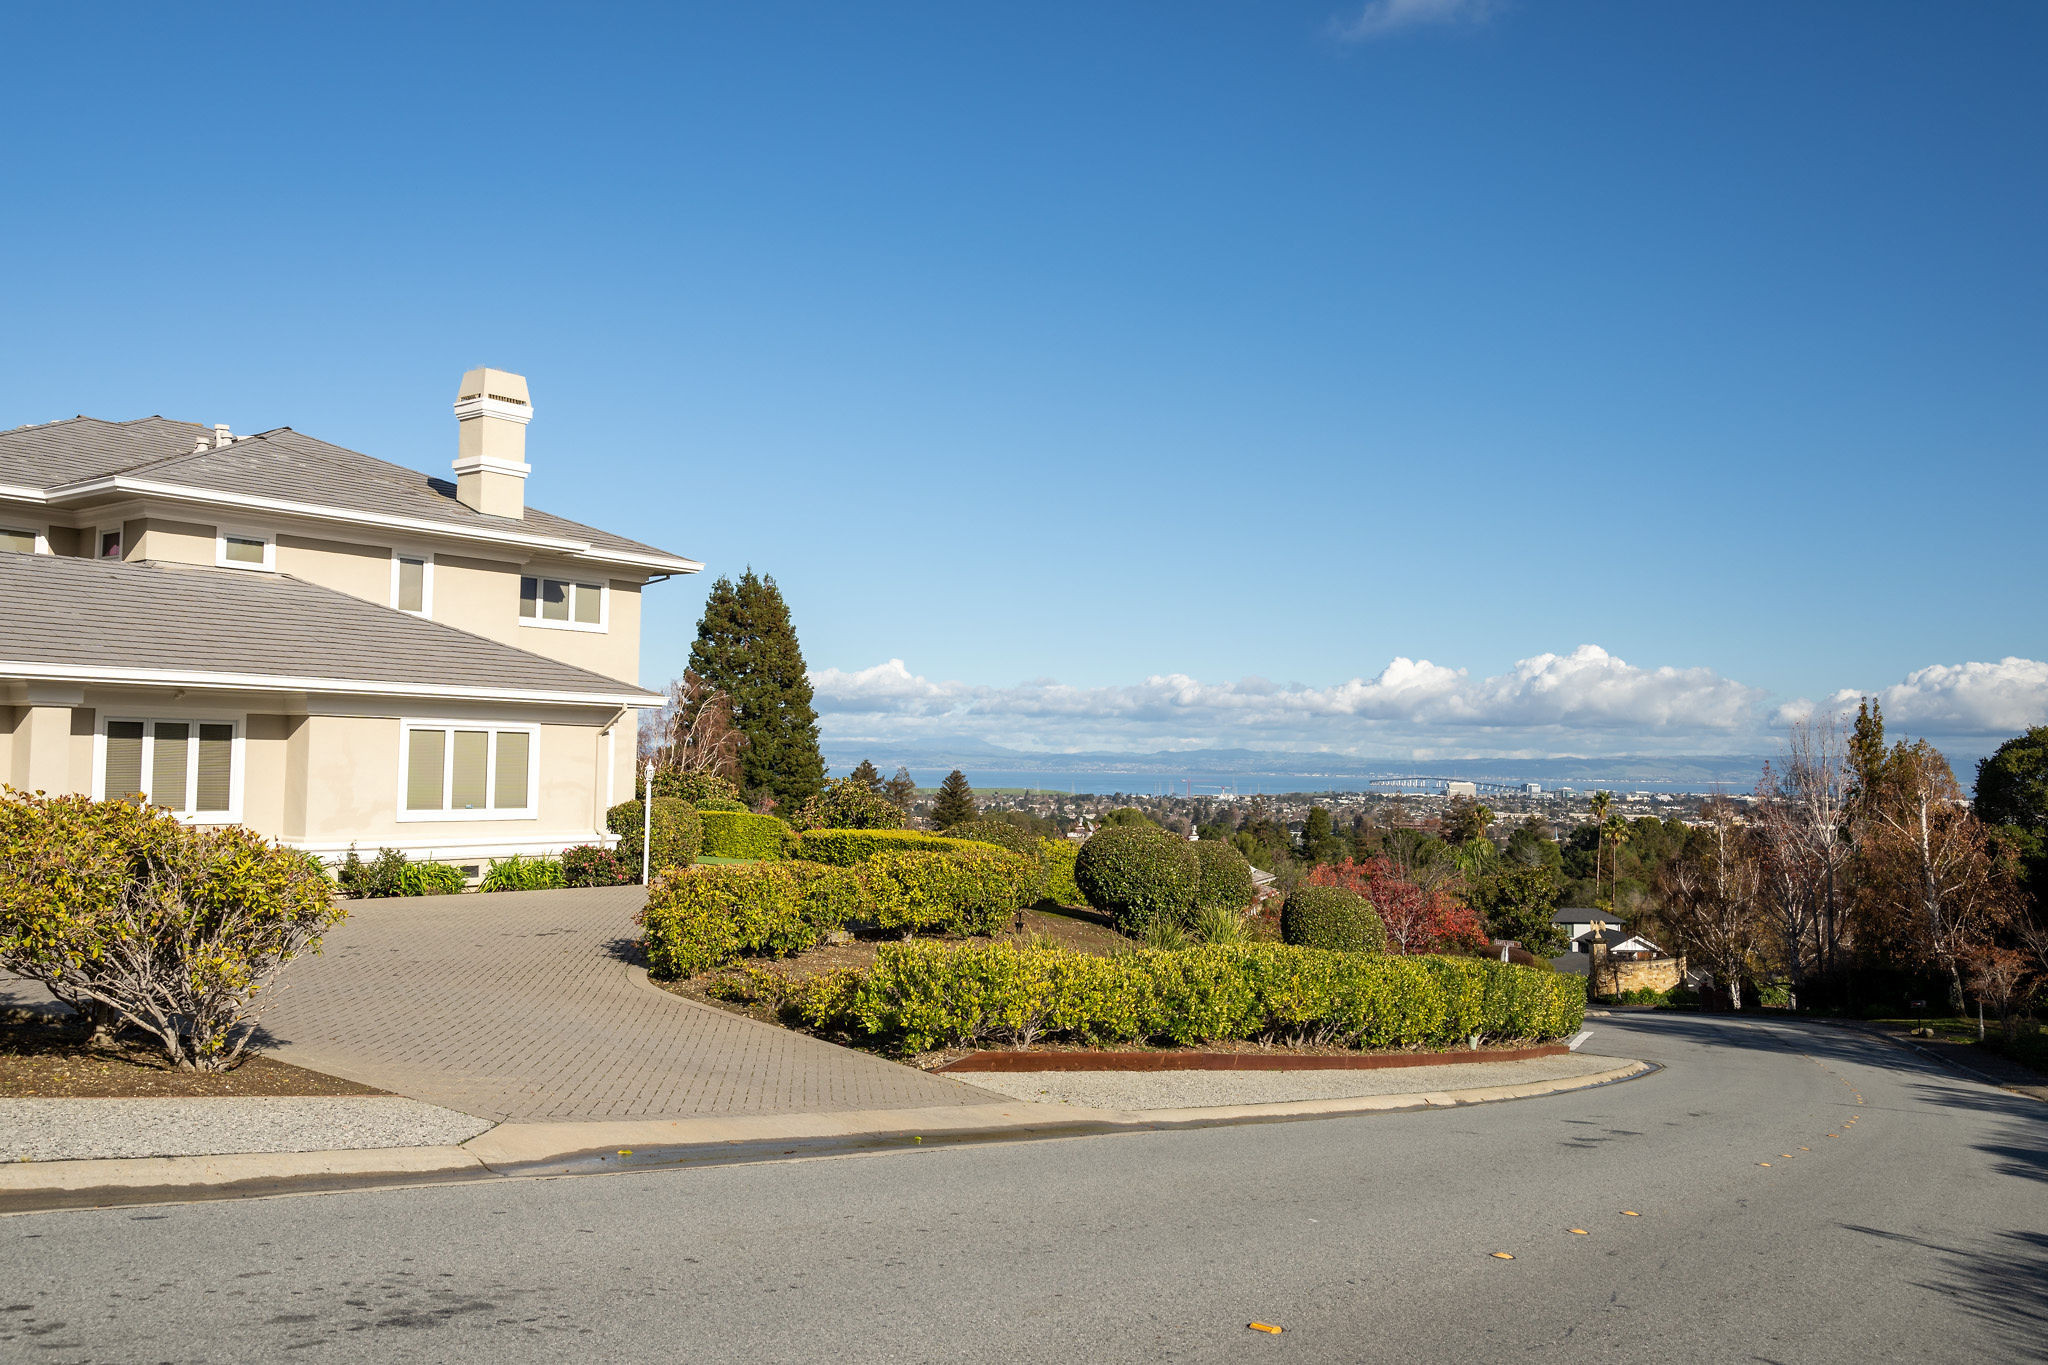 Baywood Knolls Ranch style home with a view of the city in San Mateo.